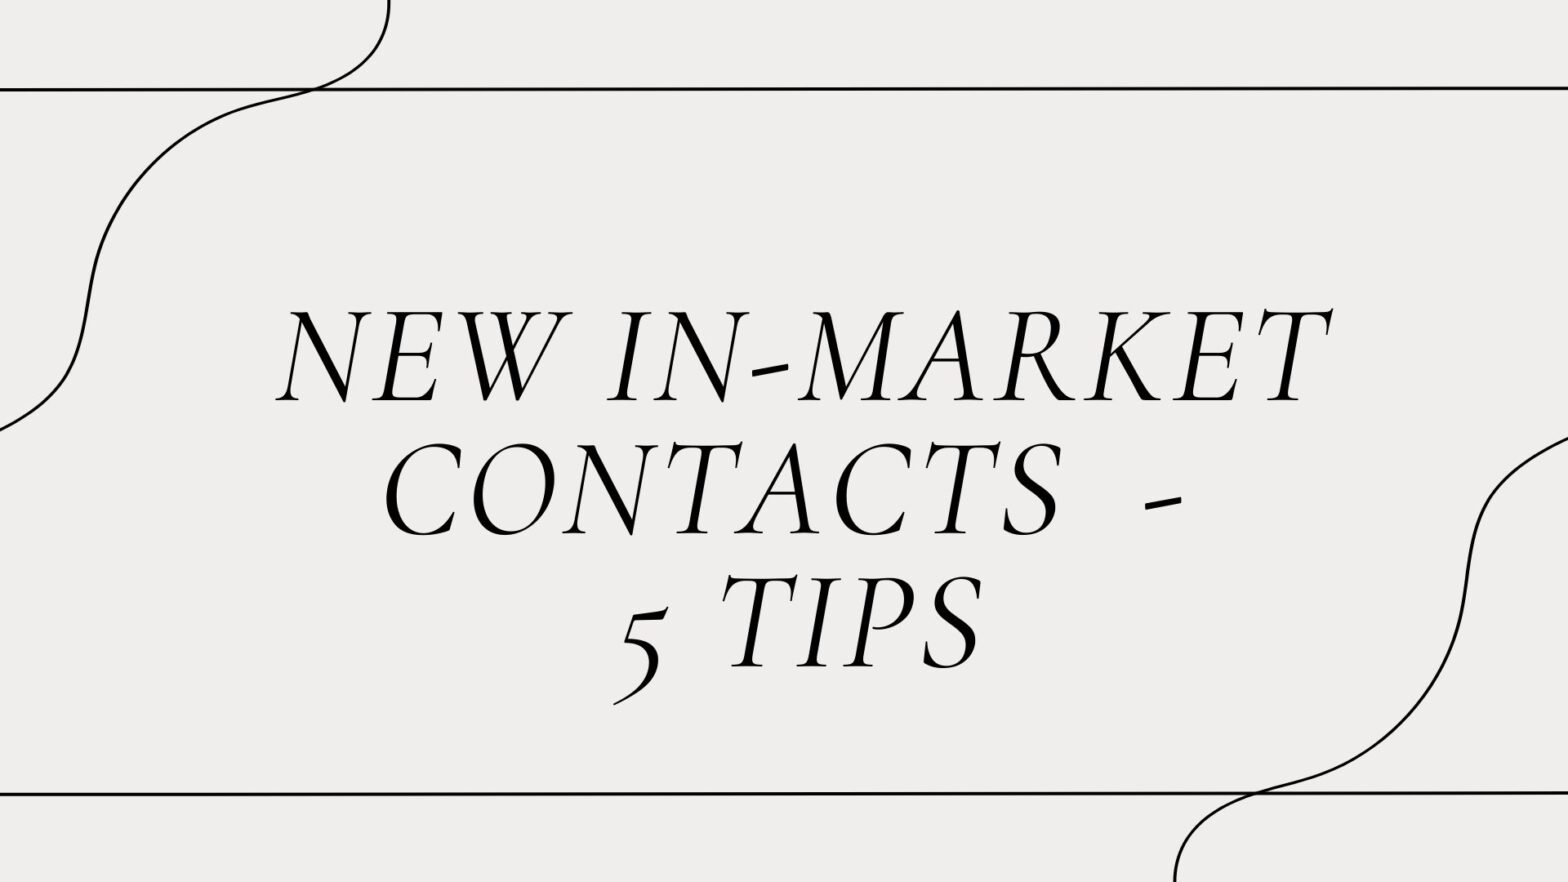 5 Tips for New In-Market Contacts